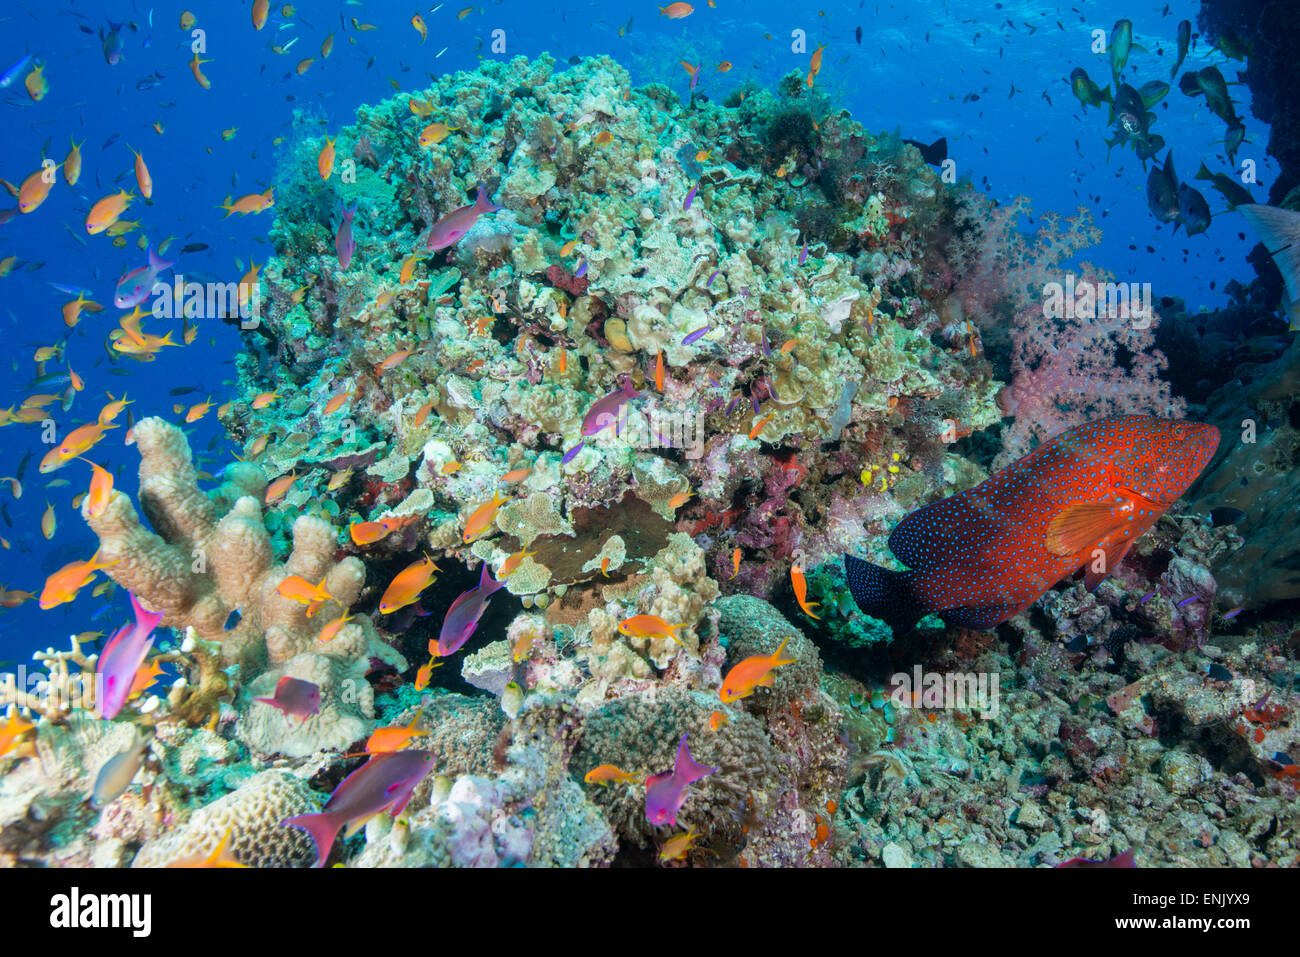 Colourful reef fish plus Leopard Coral grouper with hard and soft corals on reef, Queensland, Australia Stock Photo